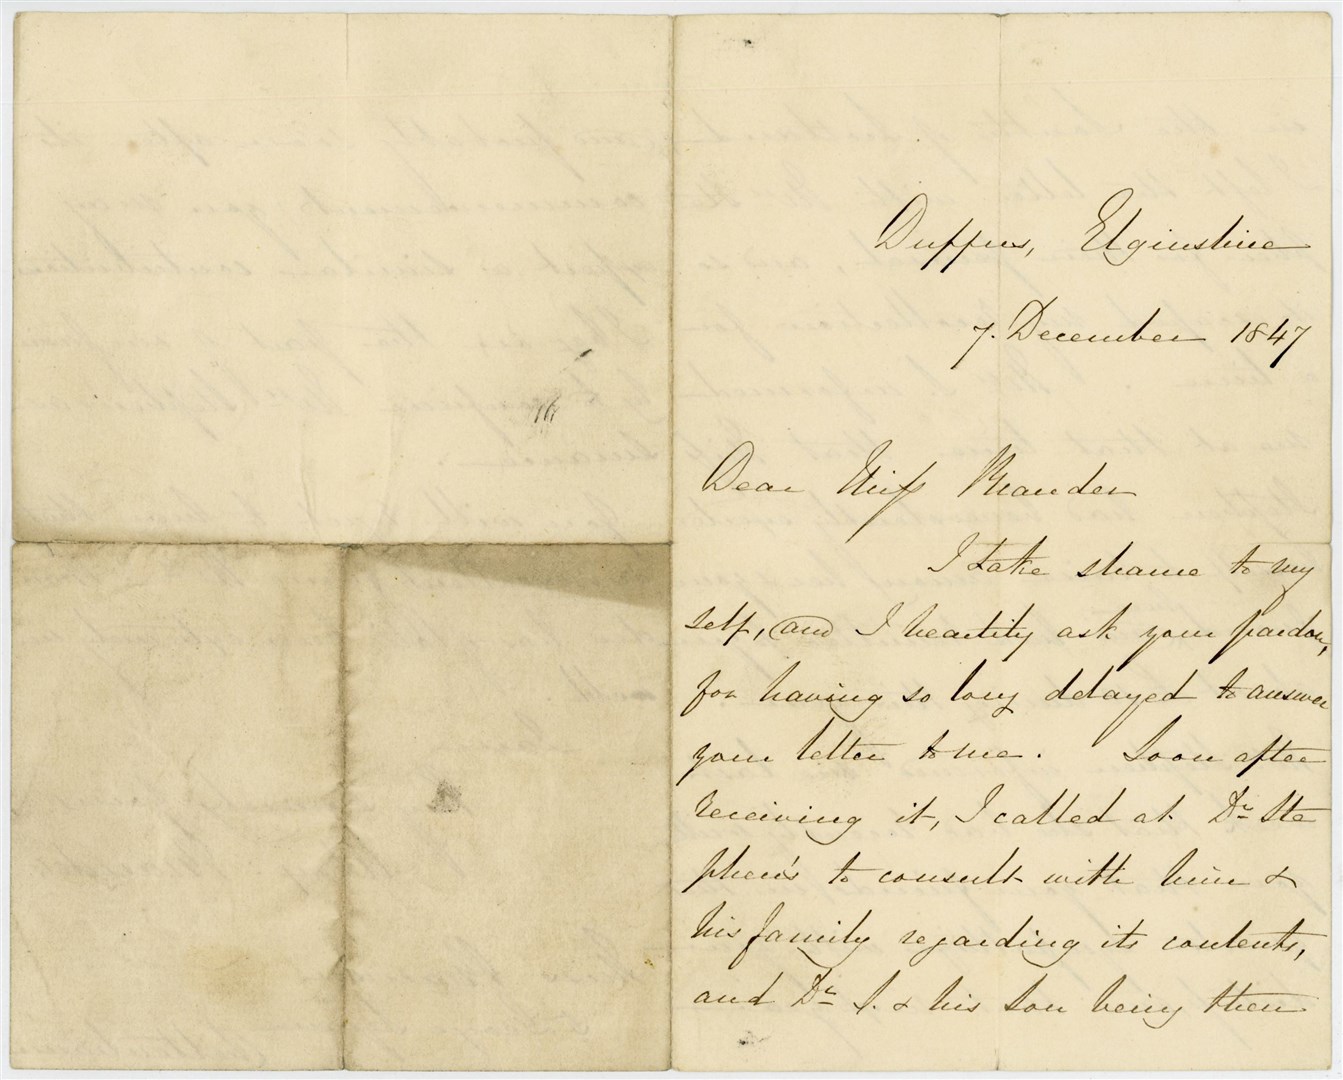 Another of the hundred or so letters. This one is dated 1847 and appears to have been sent from Cheltenham.